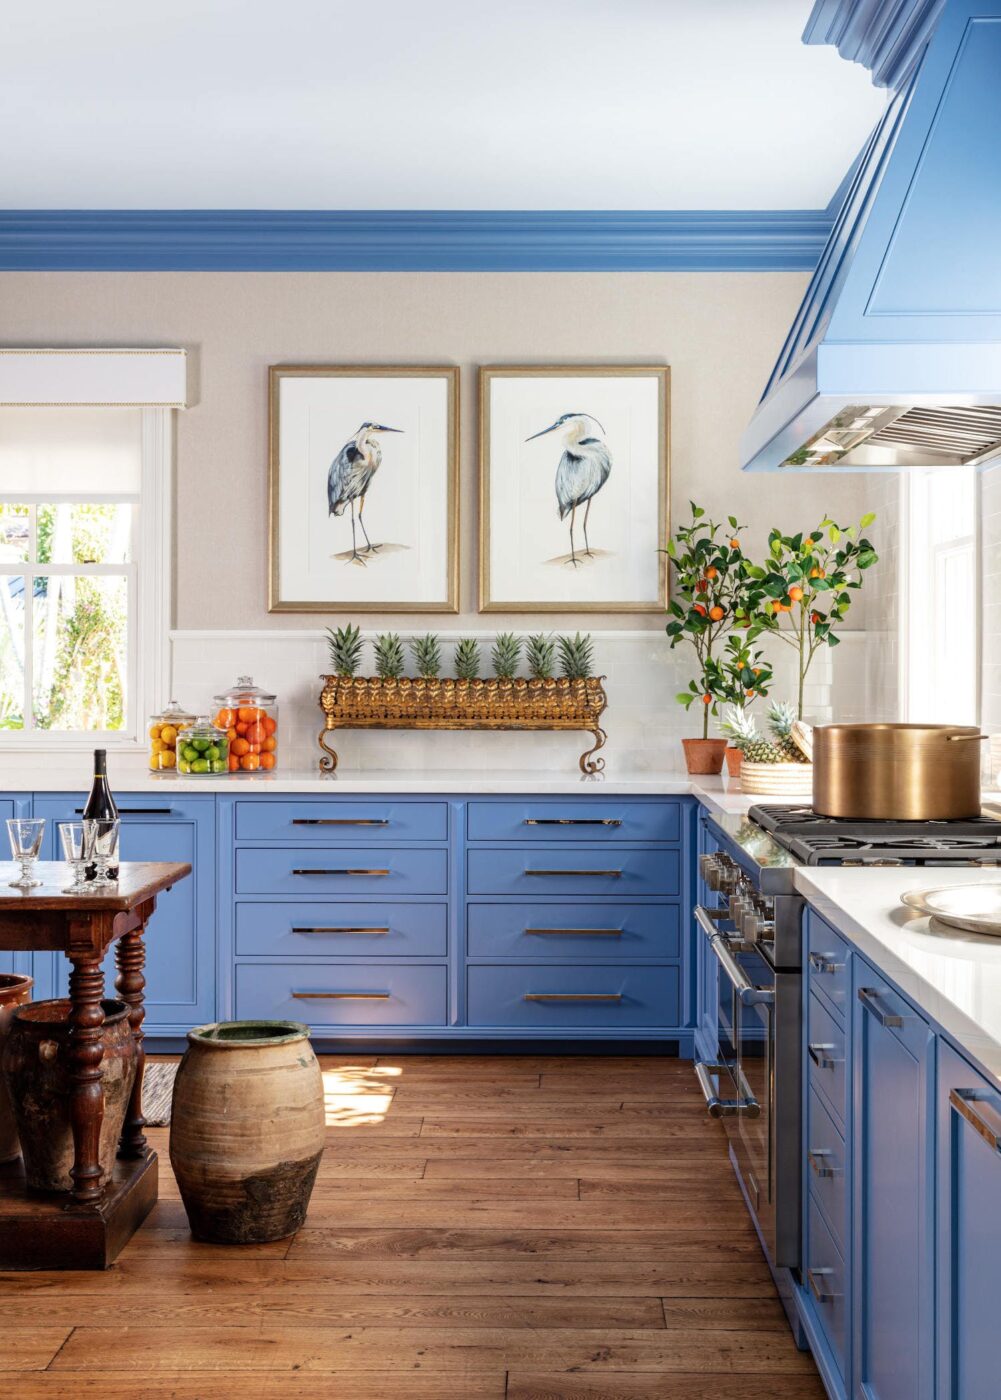 Seven ideas to refresh your kitchen